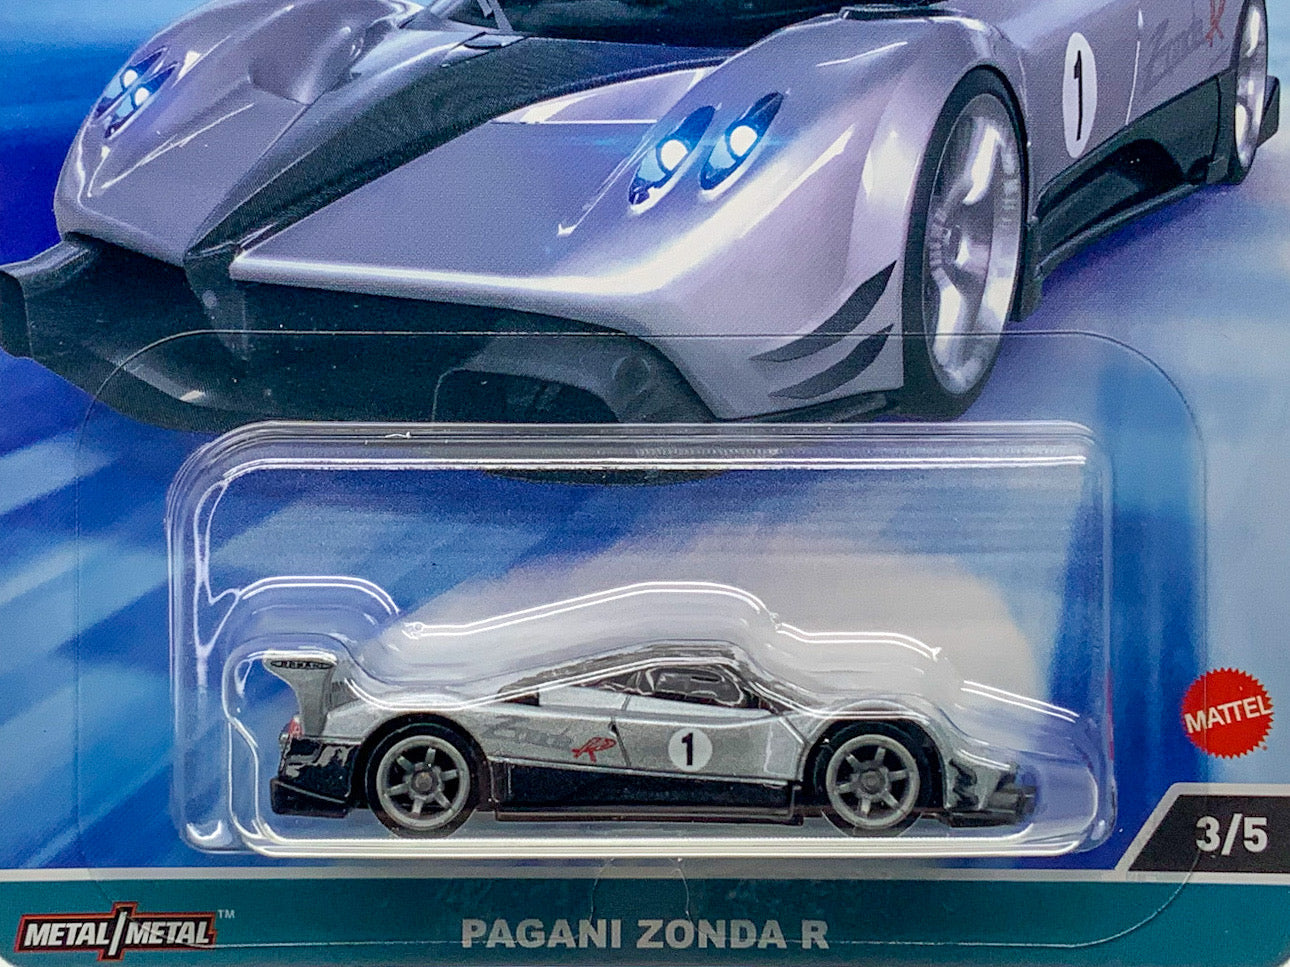 Buy at www.tatoyshop.com Hot Wheels Car Culture  2023 Hot Wheels Car Culture Speed Machines Series Pagani Zonda R 3/5  Number 3 from the set of 5 Speed Machines Series Premium Real Riders Metal Mattel FPY86 Shop Now   International and Domestic delivery by Australia Post 